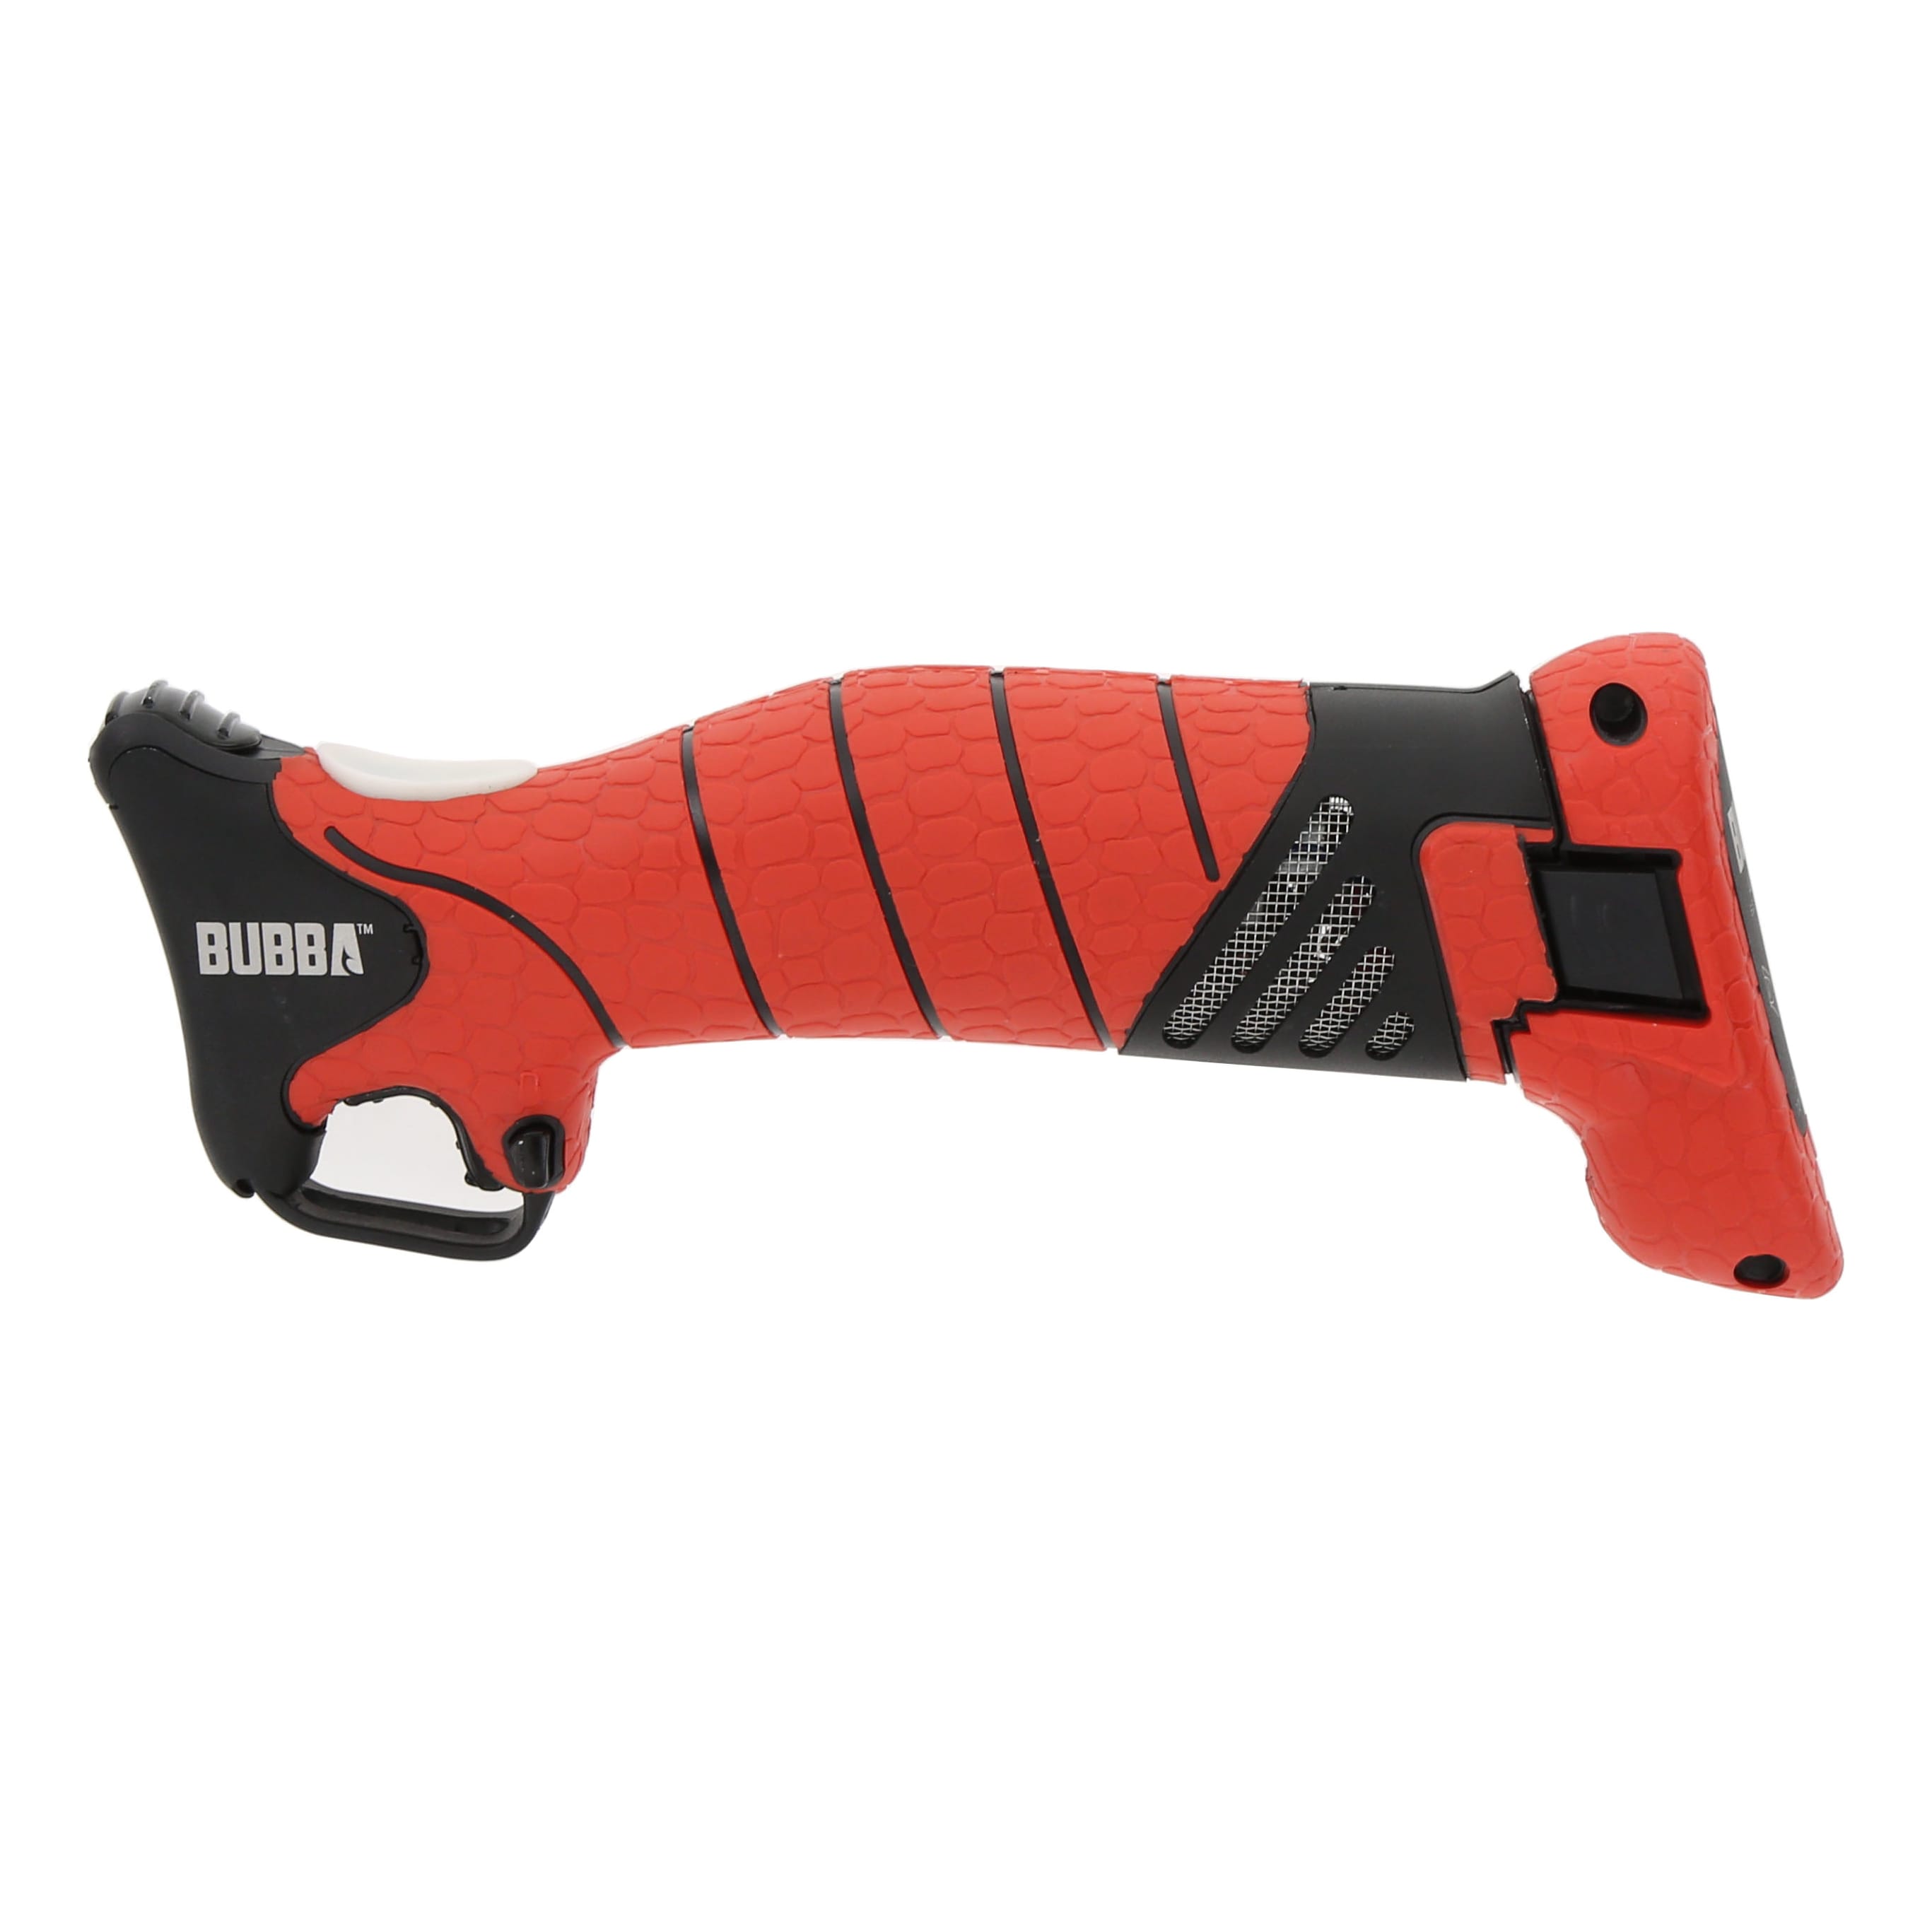 Bubba® Pro Series Lithium Ion Electric Fillet Knife